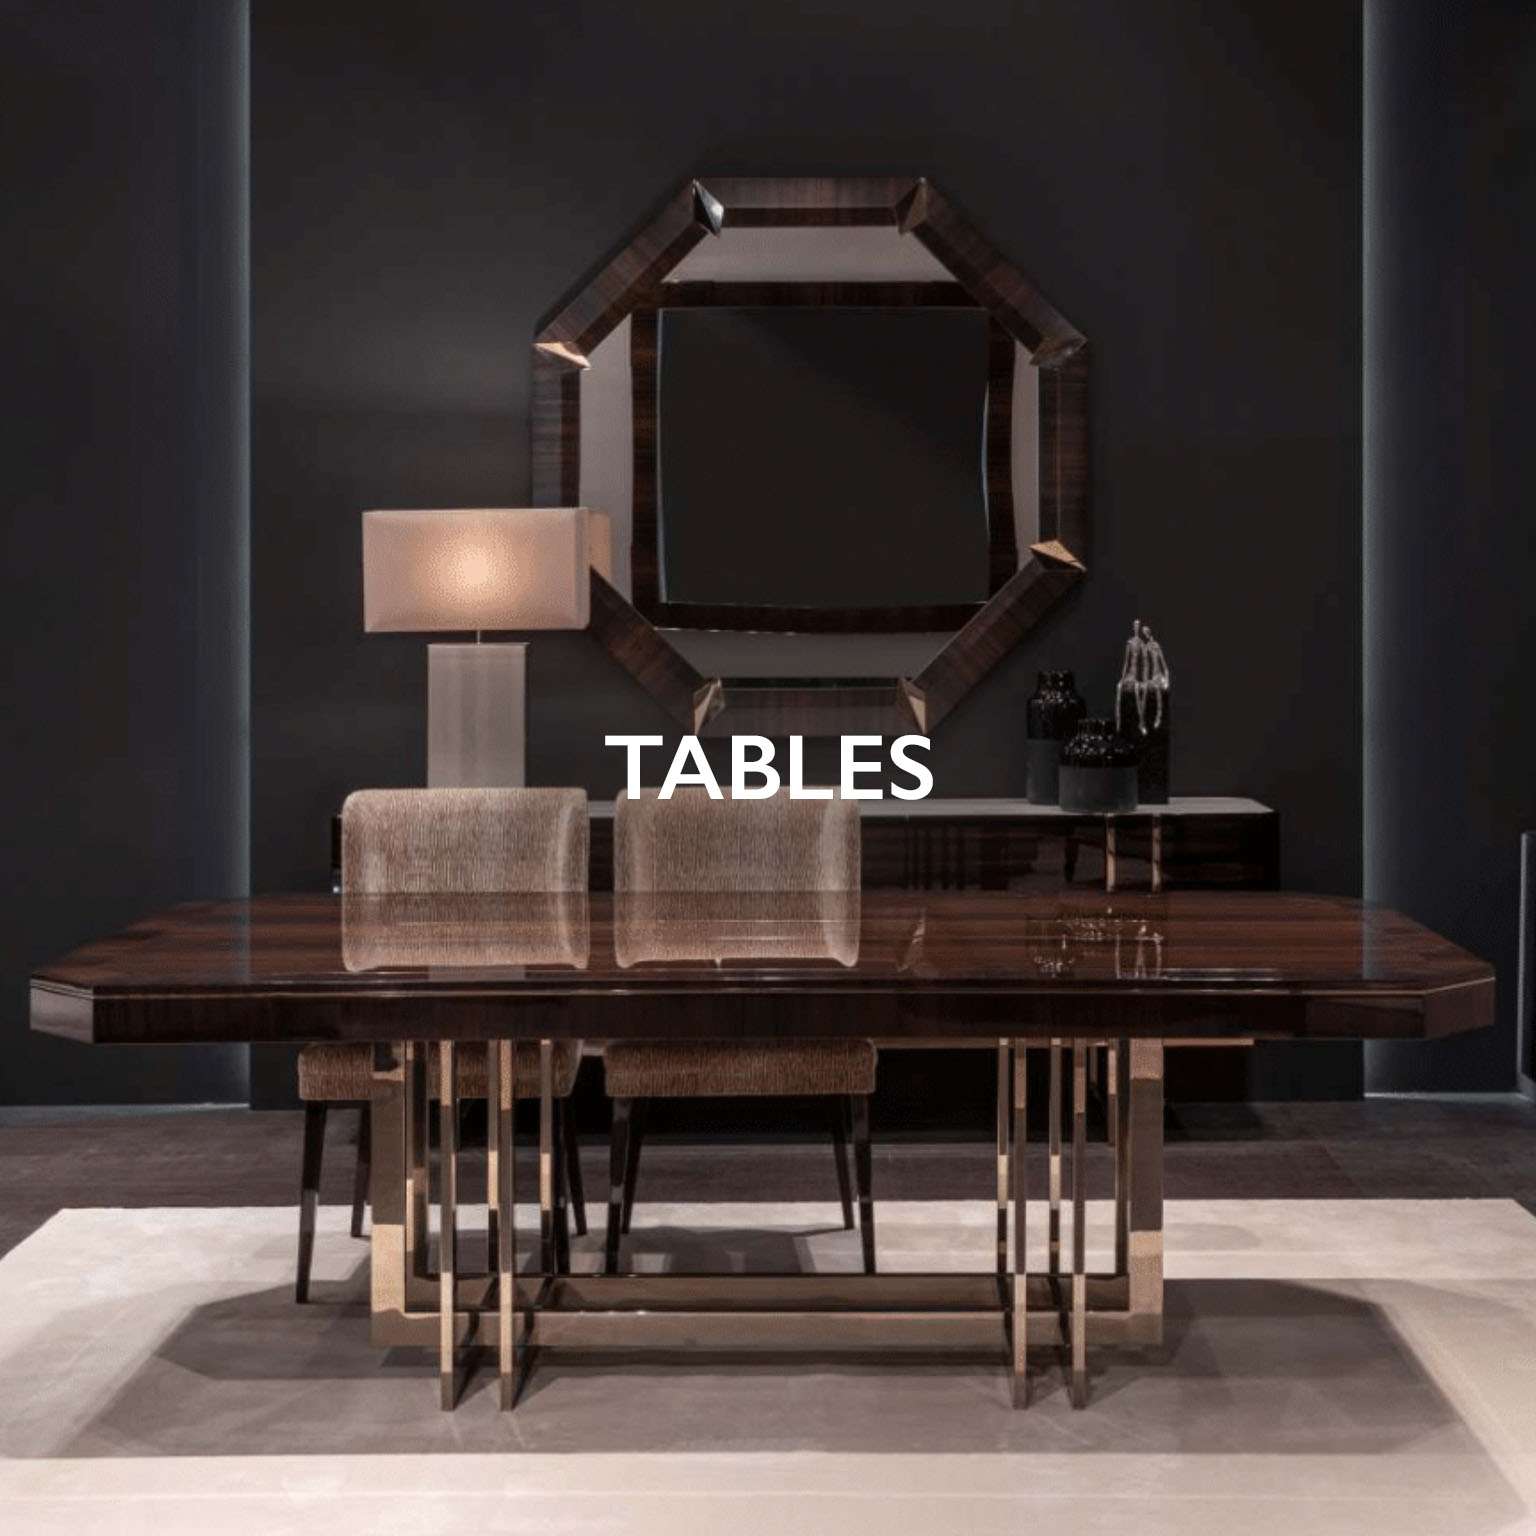 07_Tables